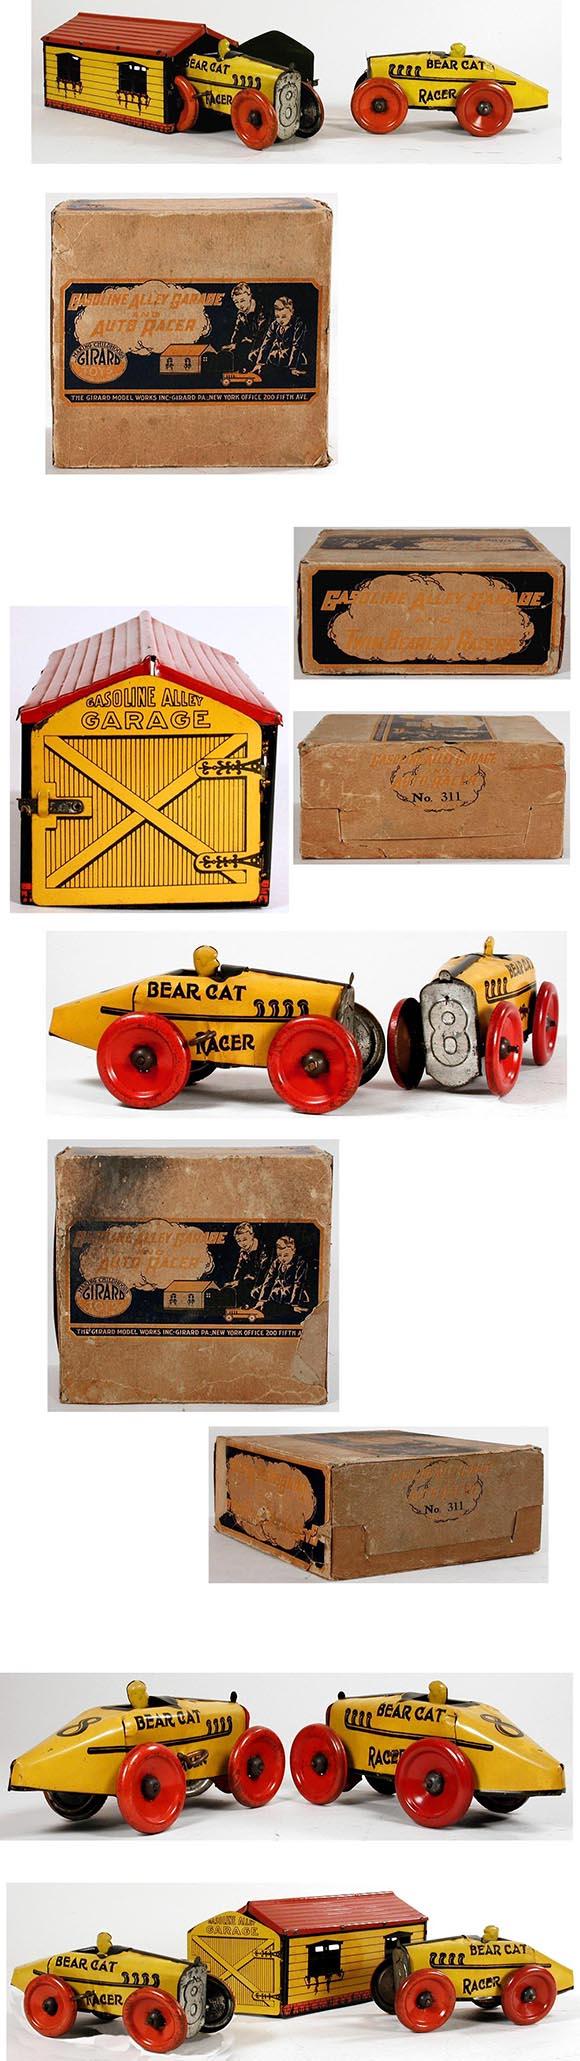 c.1924 Girard, Gasoline Alley Garage and Two Bear Cat Racers in Original Box